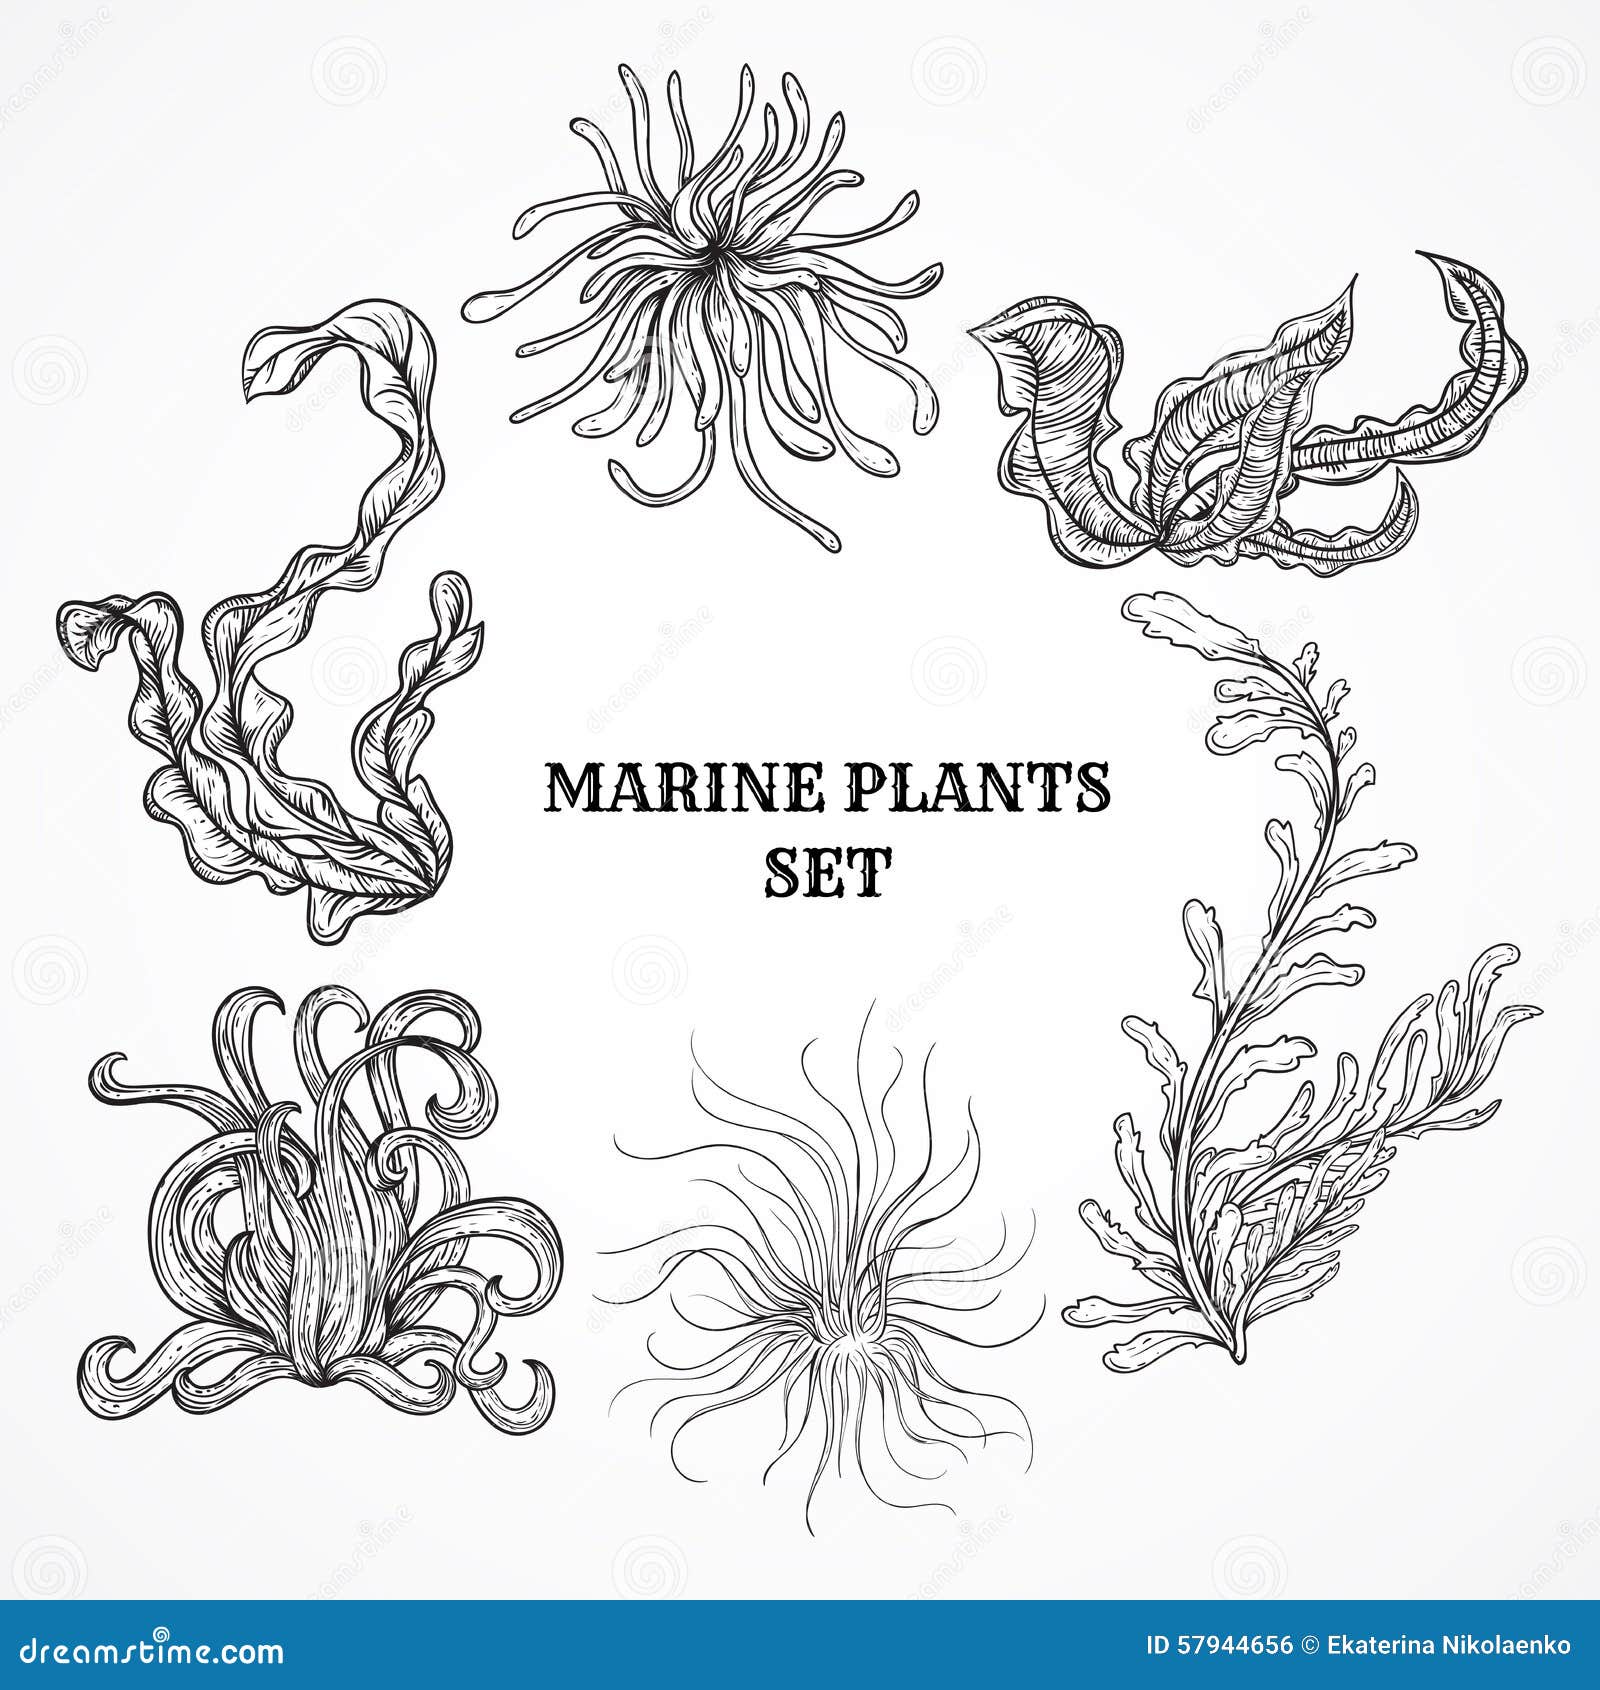 collection of marine plants, leaves and seaweed. vintage set of black and white hand drawn marine flora.